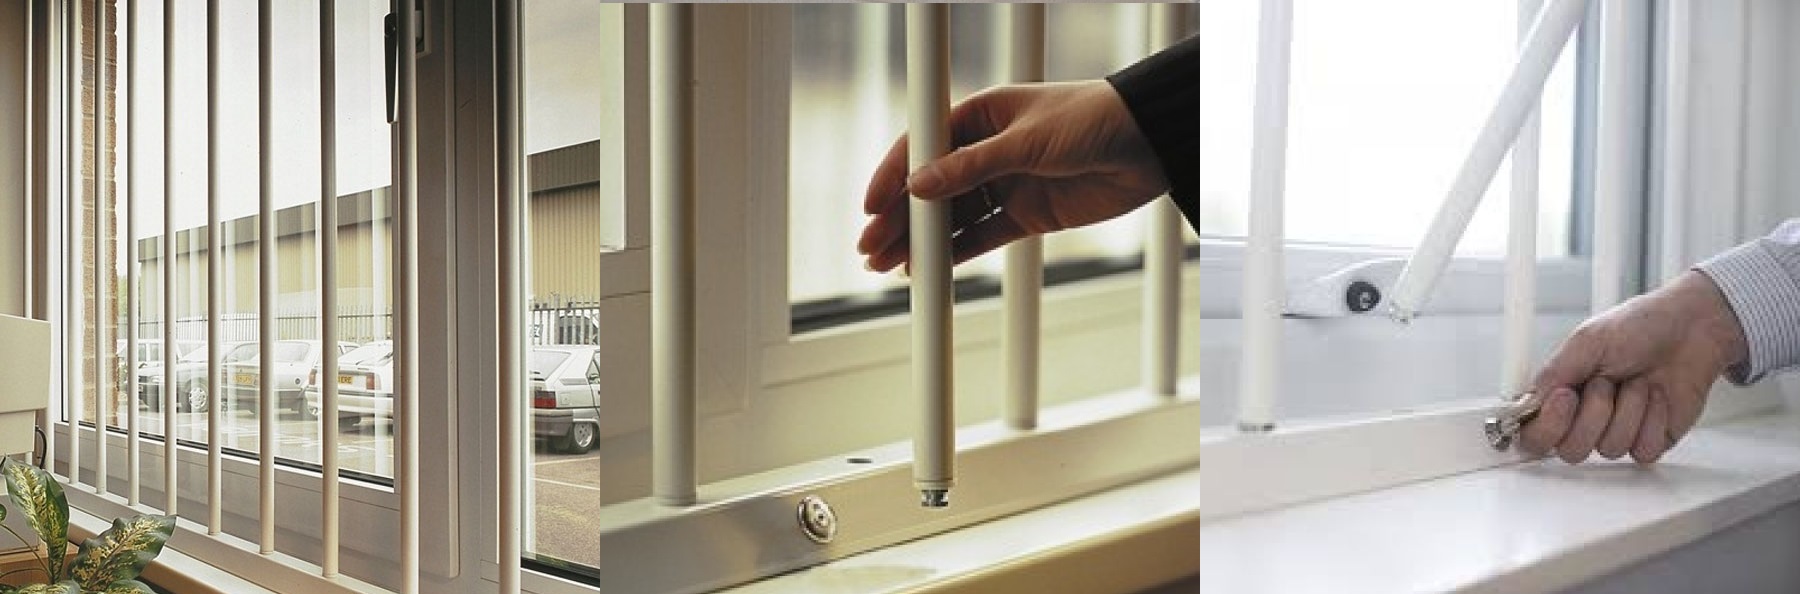 Removable window security bars